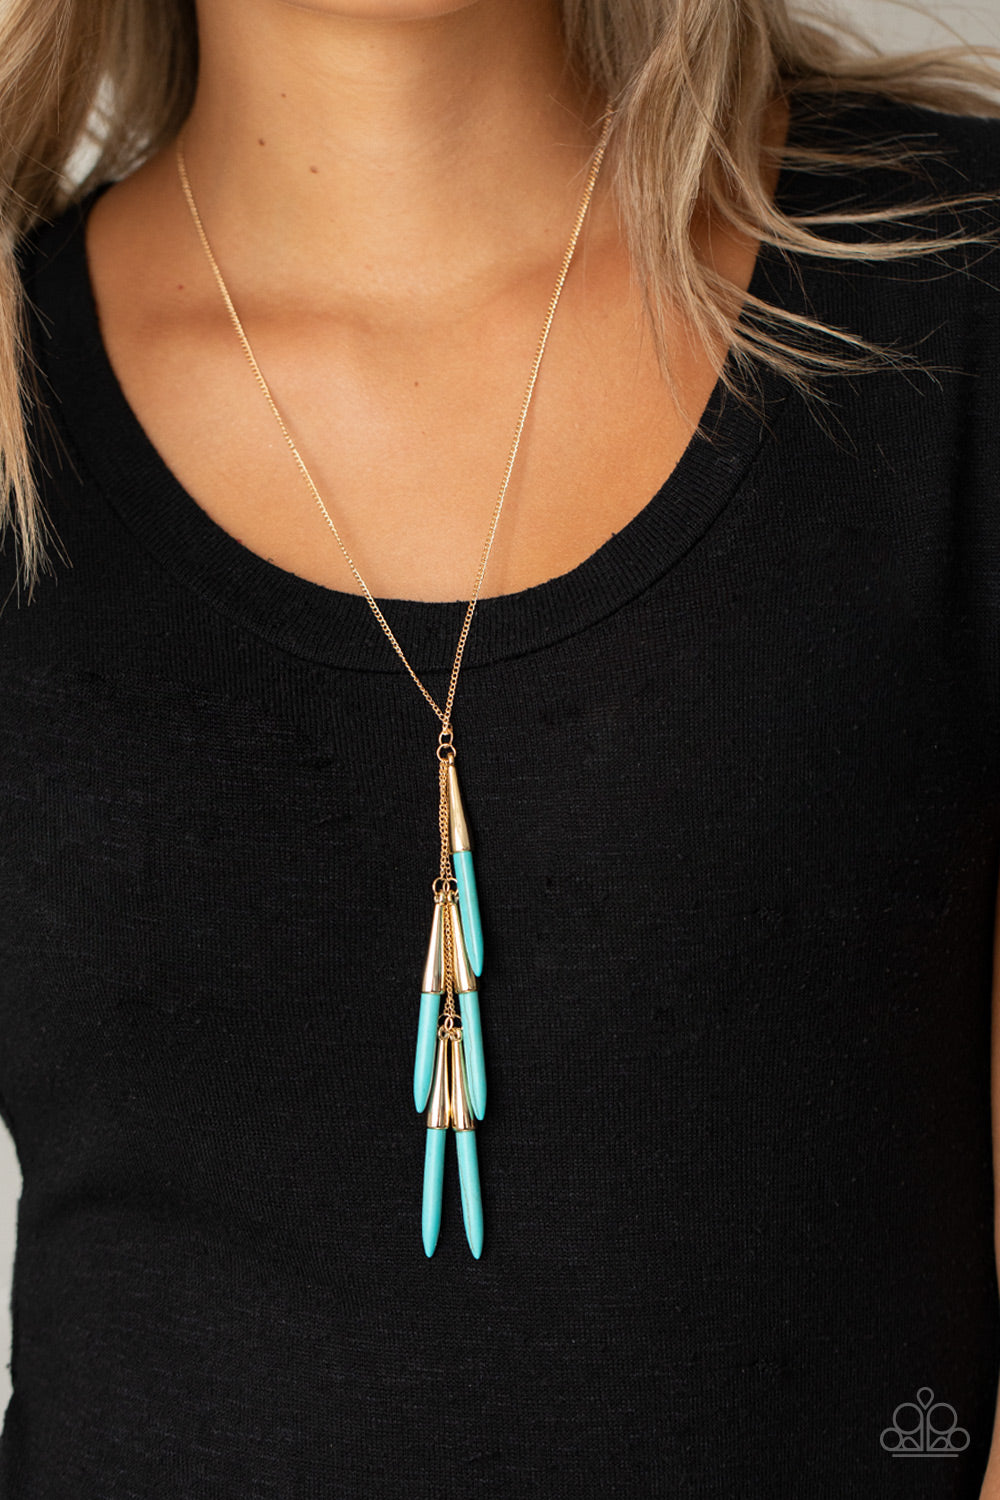 Primitive and Proper - Blue Crackle and Gold Necklace